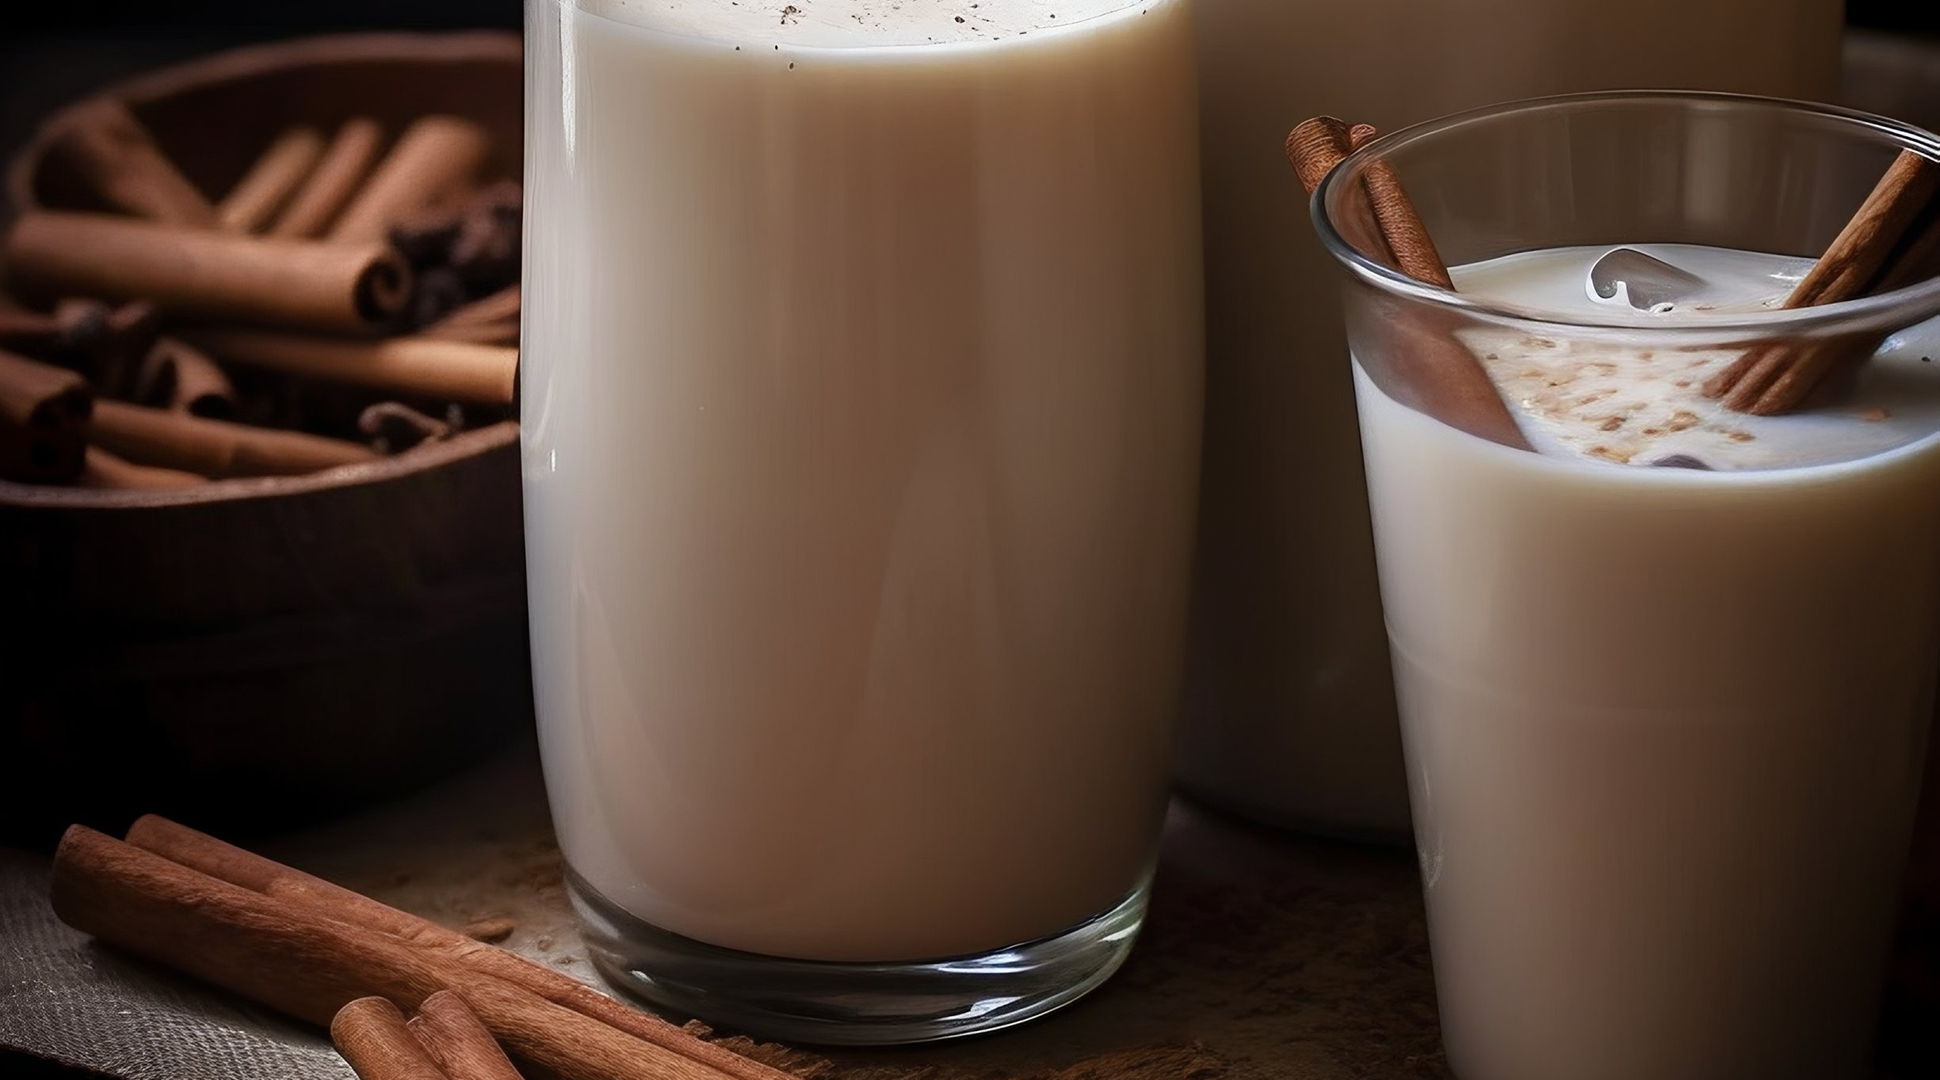 5 reasons to include dairy in your diet